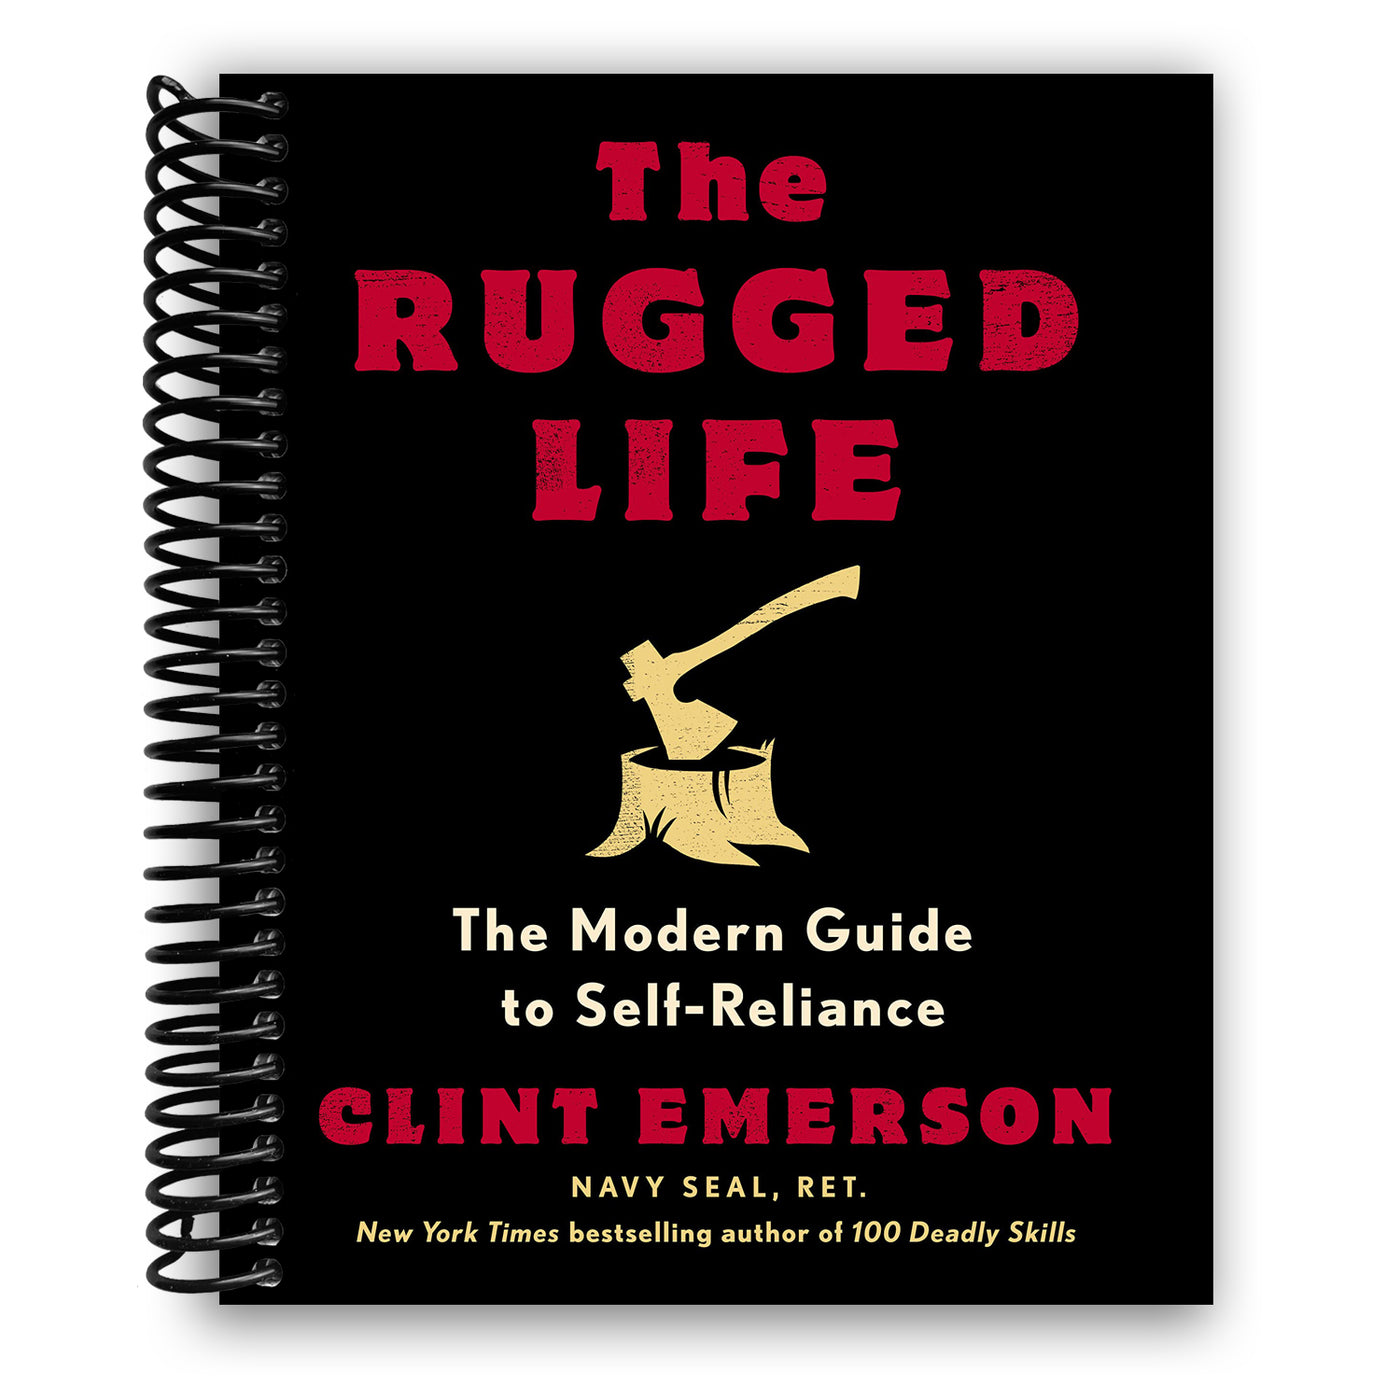 The Rugged Life: The Modern Guide to Self-Reliance (Spiral Bound)